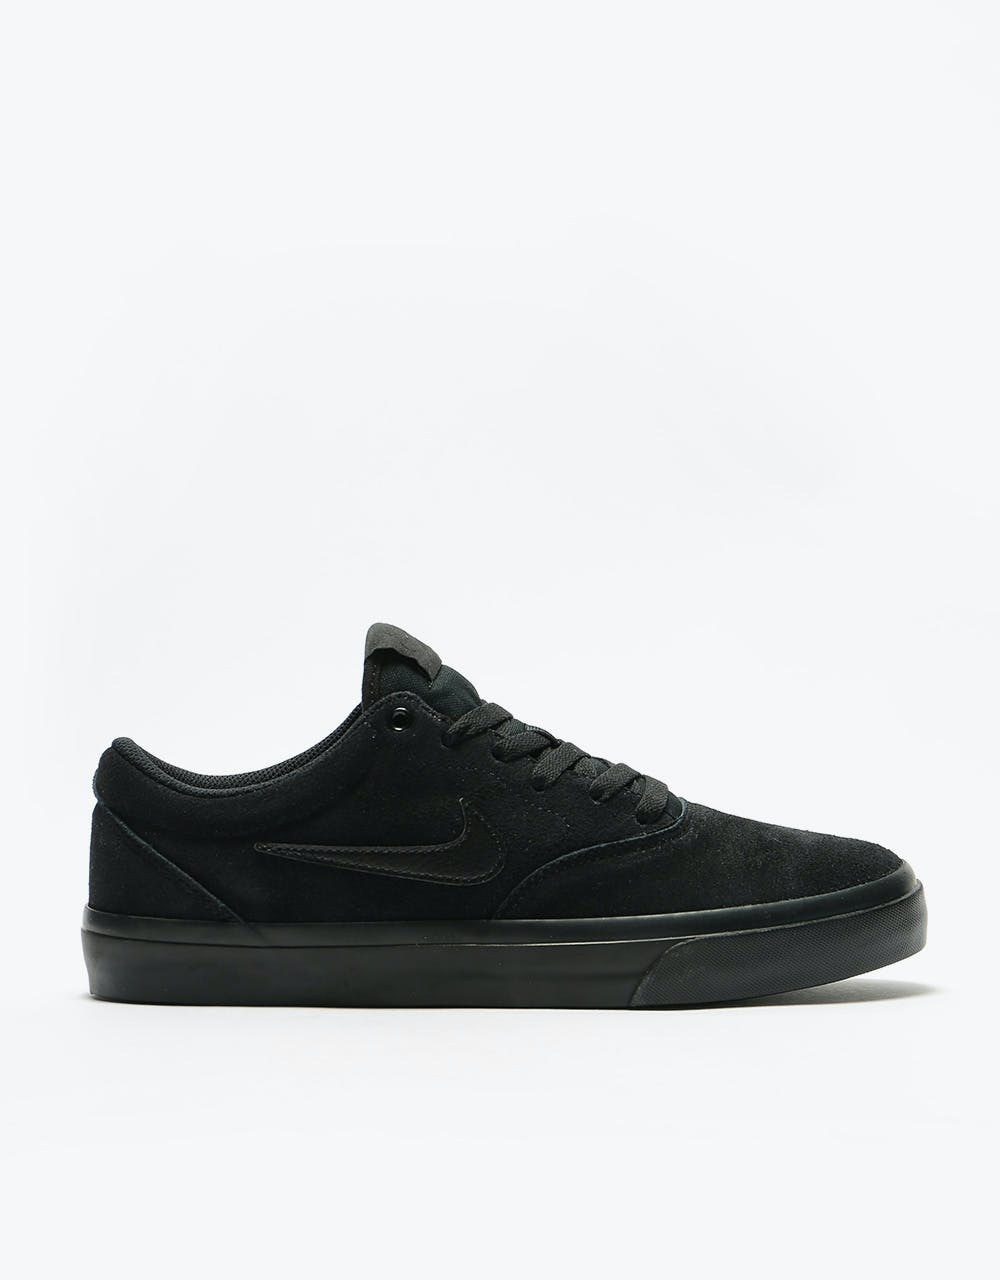 Nike SB Charge Suede Skate Shoes - Black/Black-Black – Route One